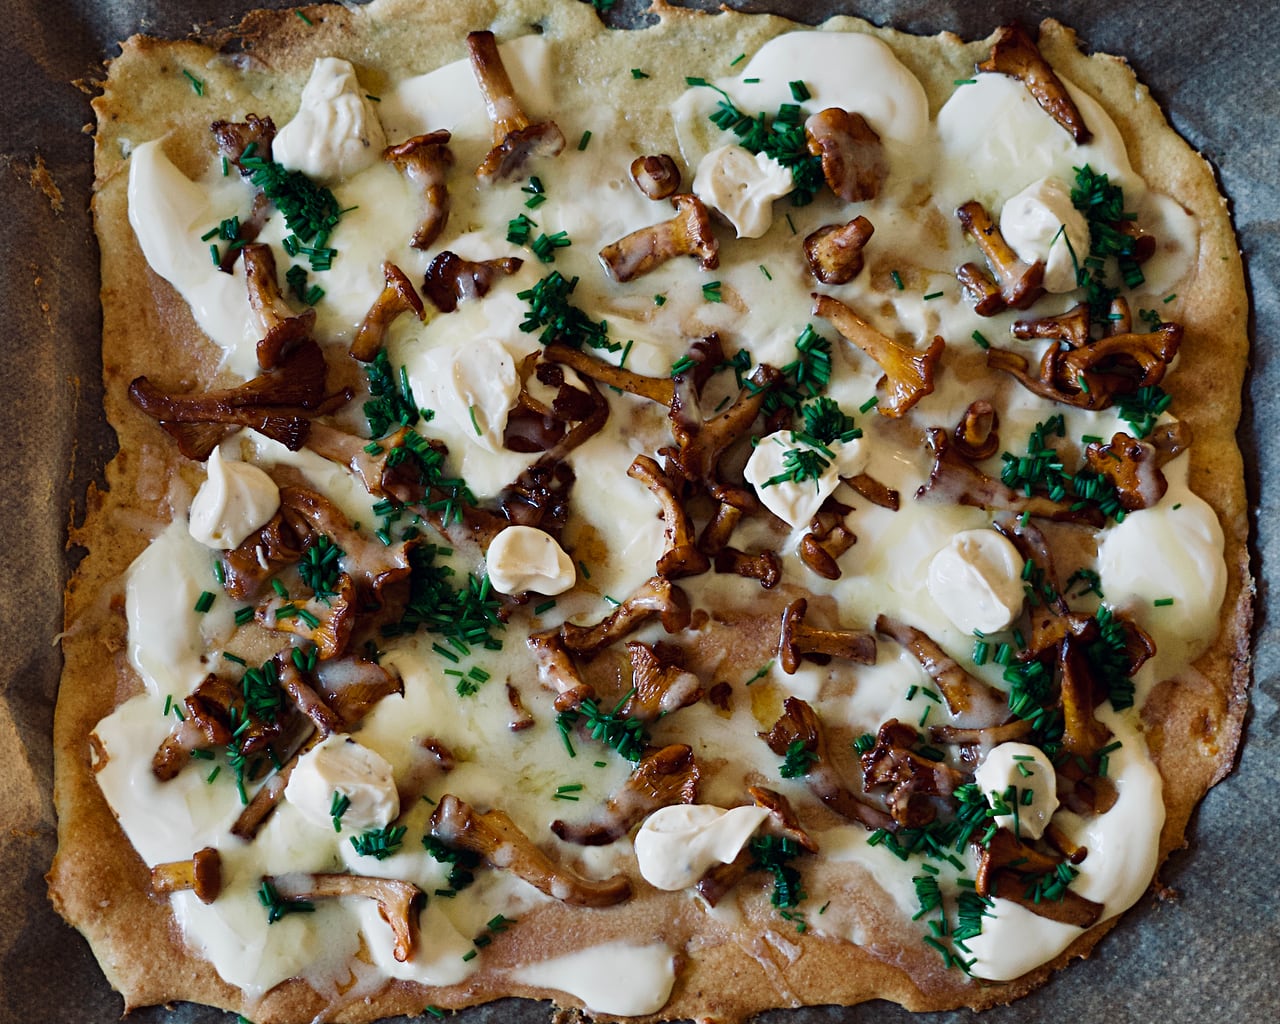 A pizza topped with chanterelle, cheese, mayo, and chive.